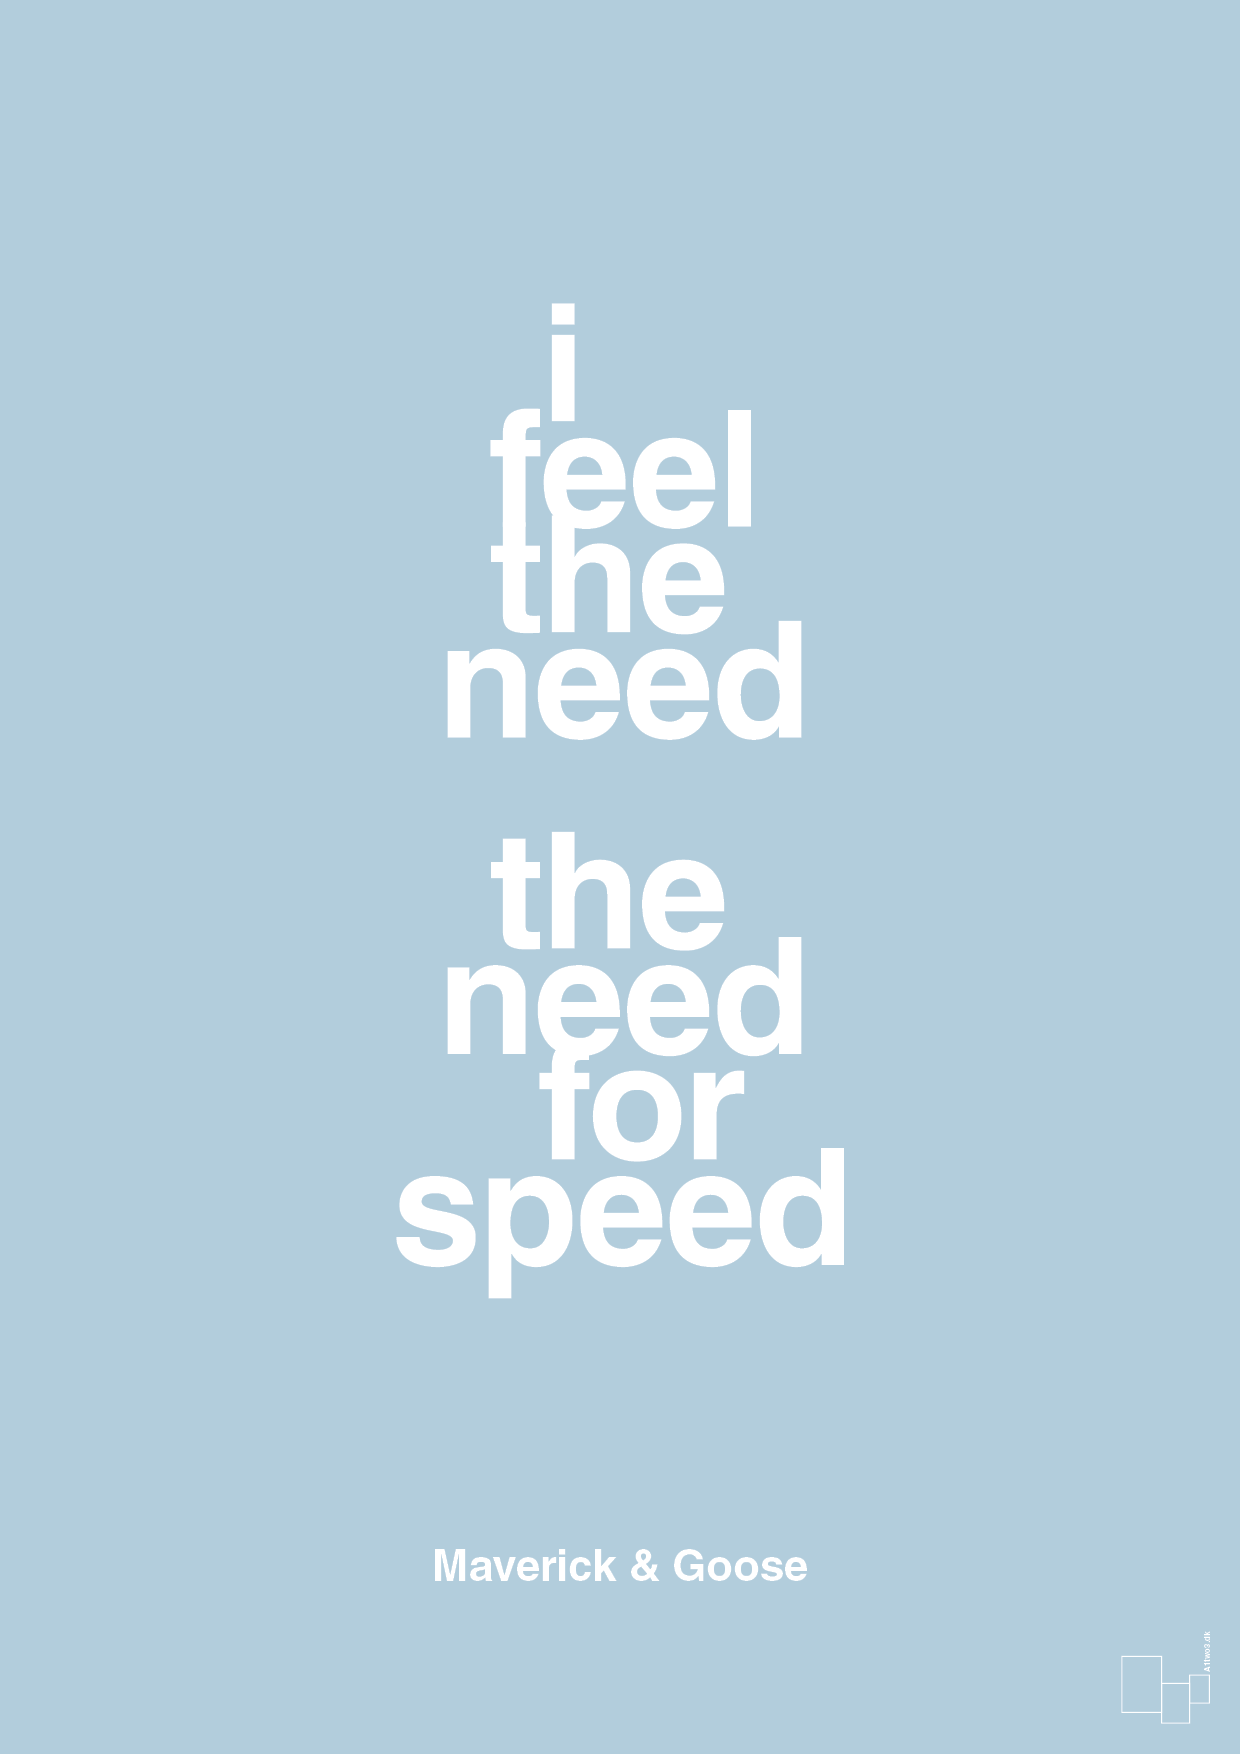 i feel the need the need for speed - Plakat med Citater i Heavenly Blue